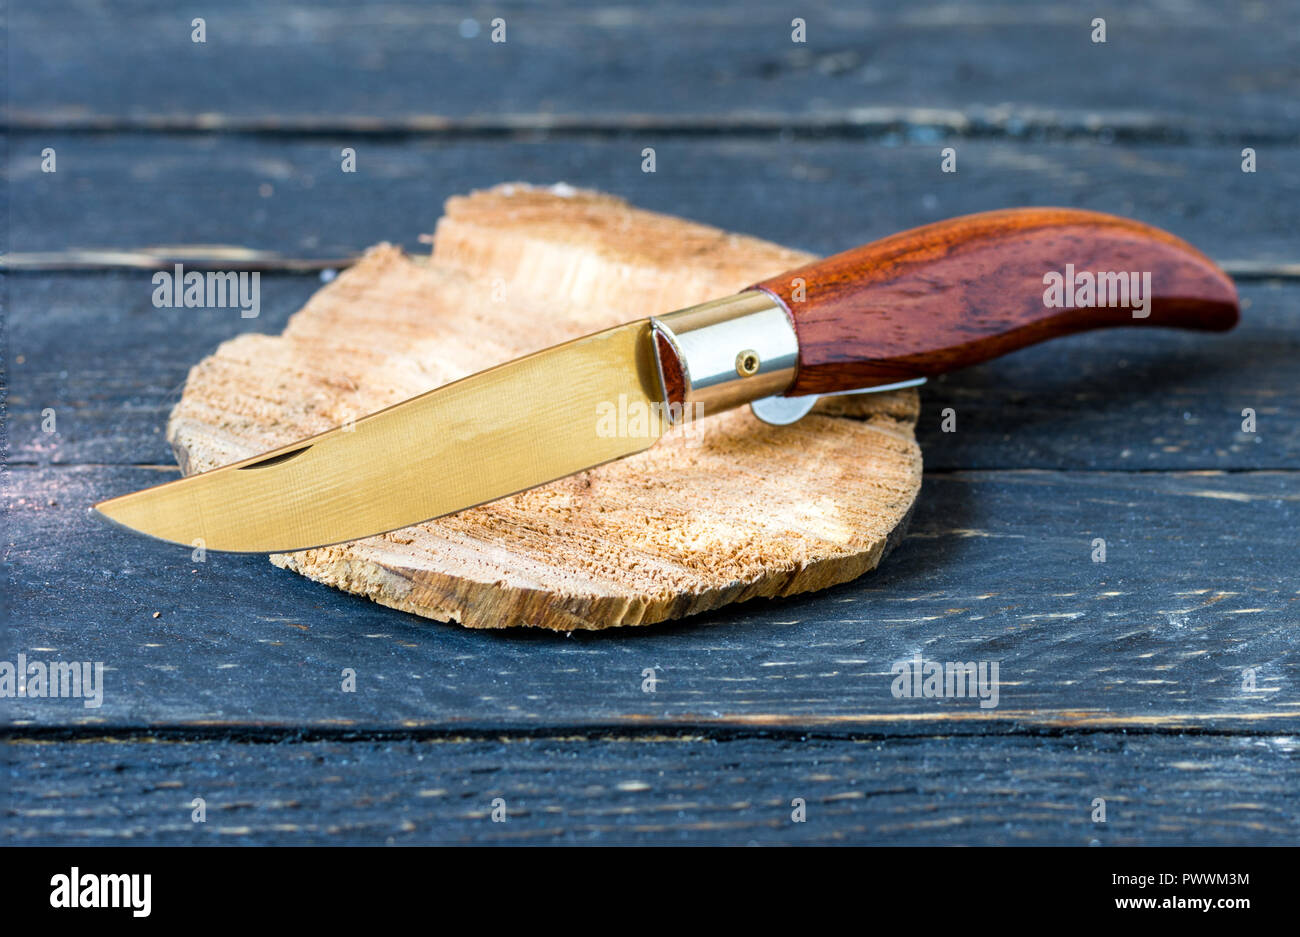 Classic folding knife with a wooden handle. Penknife. Stock Photo